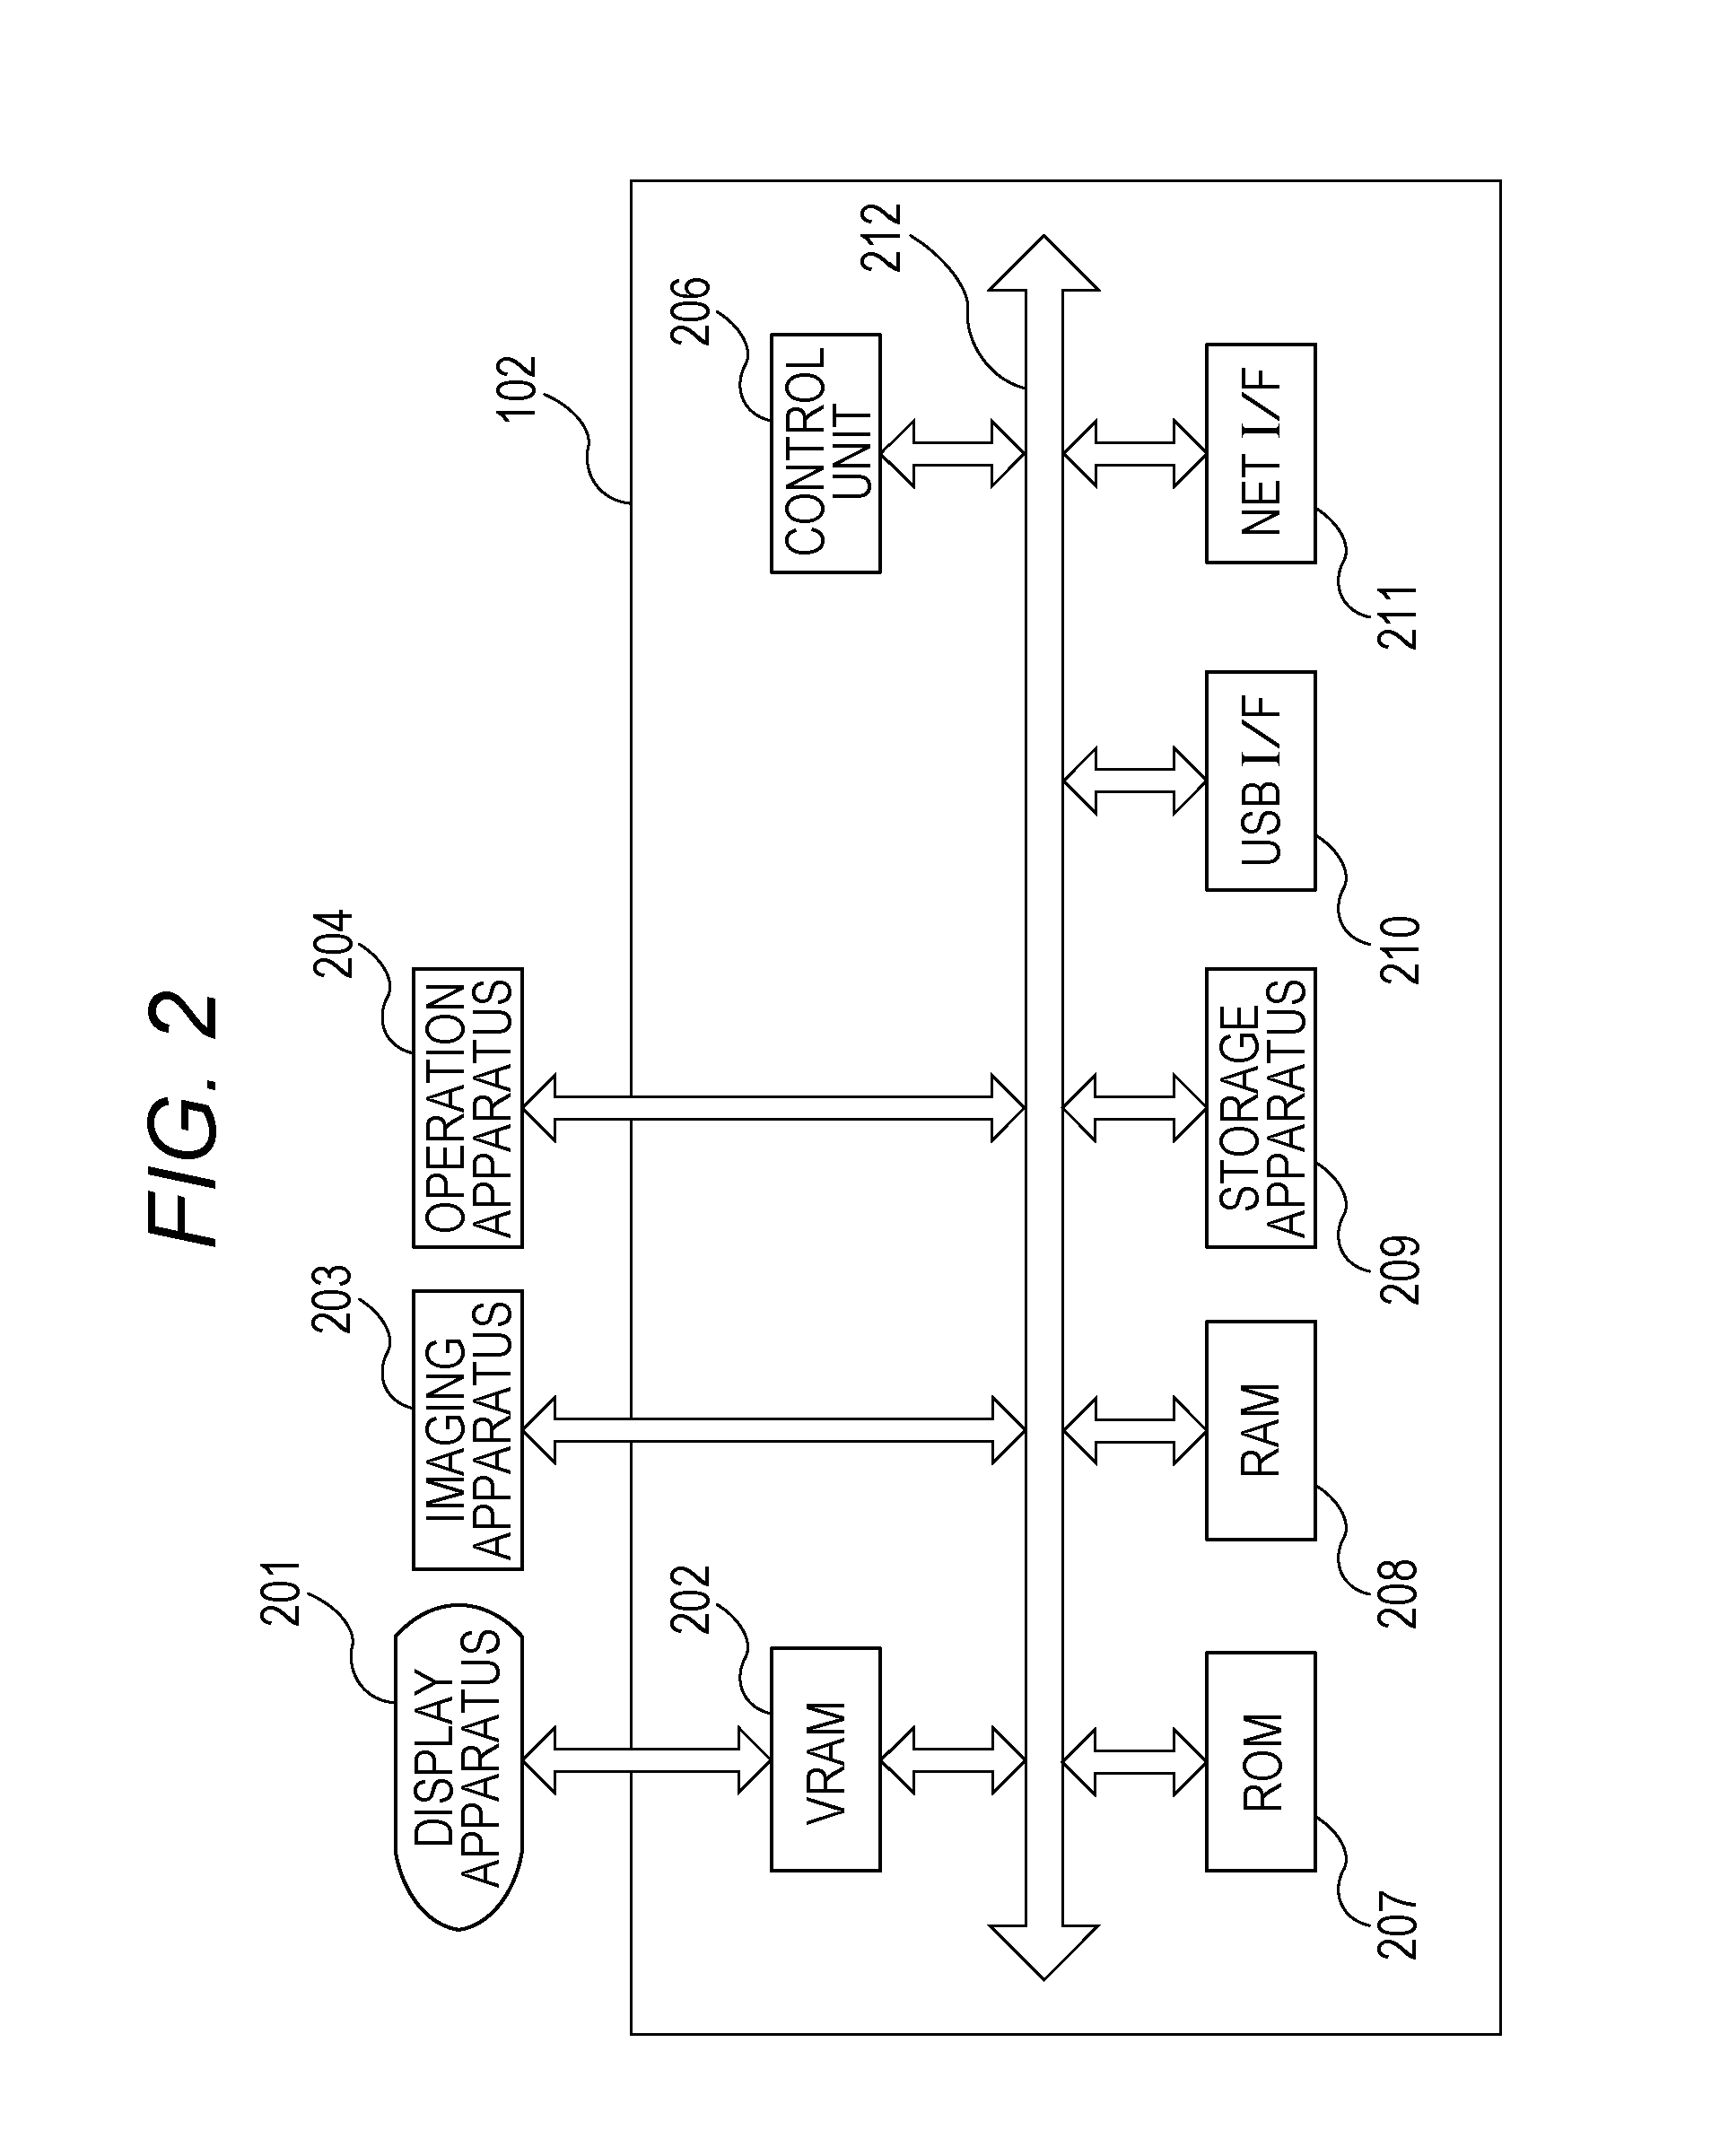 Processing information apparatus, control method and program for inputting and storing additional information according to contents